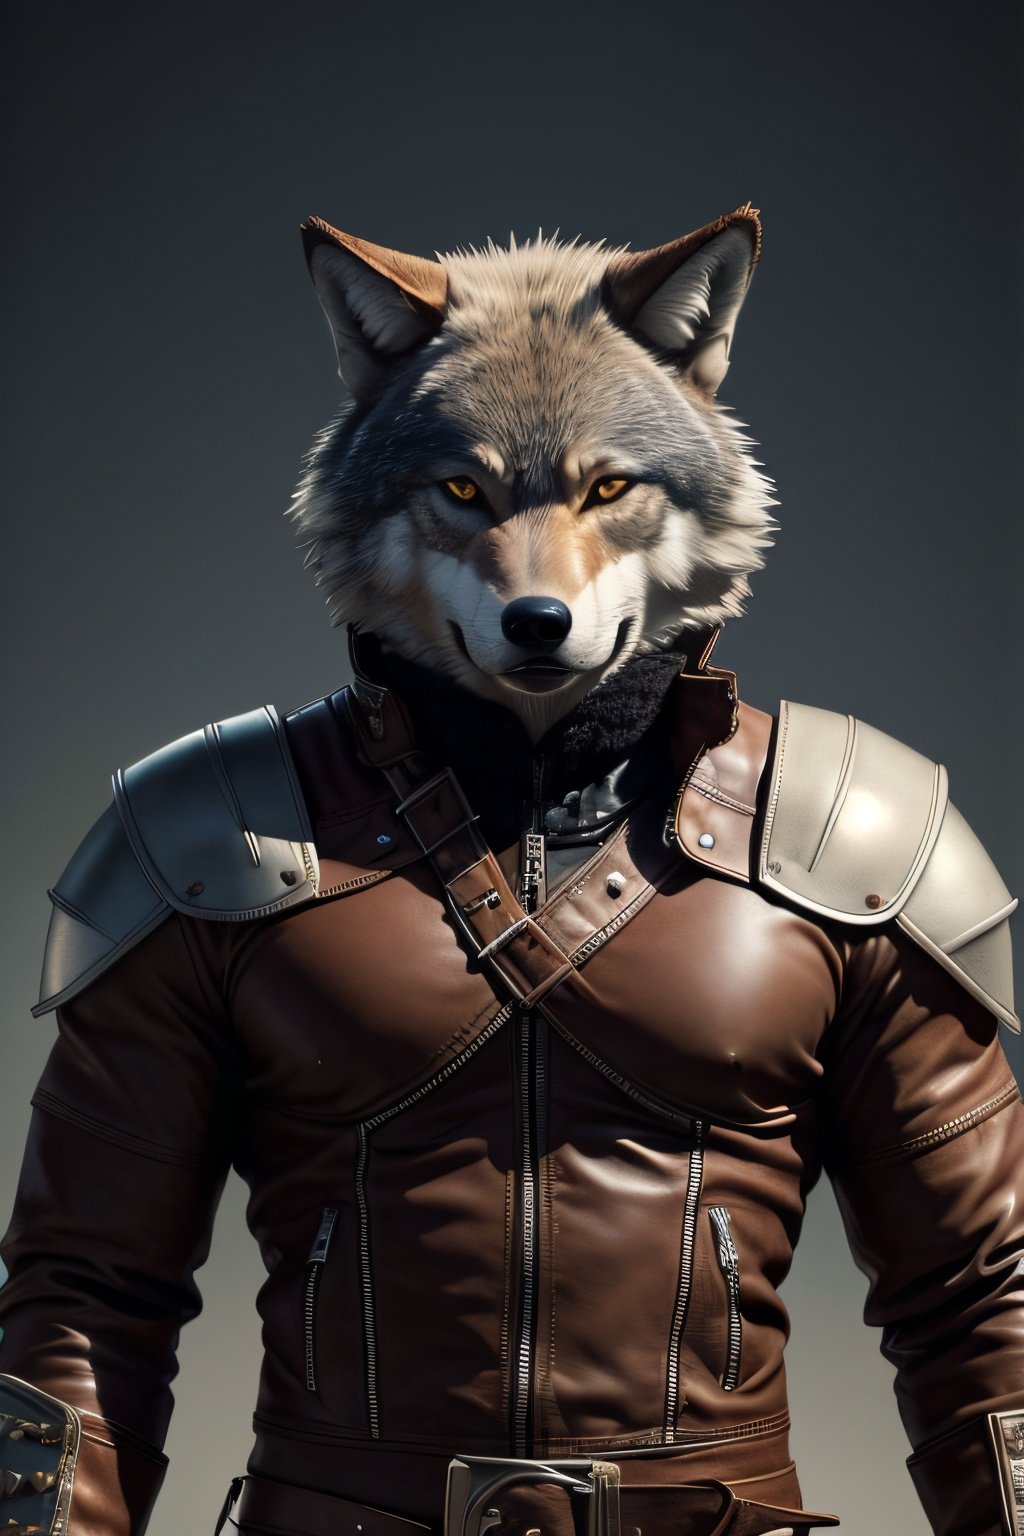 The picture shows a wolf wearing a helmet and wearing a leather jacket. The wolf has a formidable and powerful appearance, reminiscent of a warrior. The helmet he wears is made of heavy metal and has sharp teeth all around. The helmet covers his eyes, creating a mysterious and unapproachable look. Wolf also wears a leather jacket, which gives him extra protection and looks very stylish. The jacket has many small details such as embroideries, buttons and pockets that make it even more interesting and unique. The eyes of the wolf are hidden under the helmet, but their intensity and power penetrate the metal mask. The look of the wolf is full of determination and confidence, it expresses his strength and character. The wolf in the helmet has incredible power and strength. His muscular frame and formidable appearance speak of his unsurpassed physical strength. He looks like an invincible warrior, ready to take on any opponent. All these details create the image of a helmeted wolf, which is a powerful and impressive character., (waifu, anime, exceptional, best aesthetic, new, newest, best quality, masterpiece, extremely detailed:1.2),